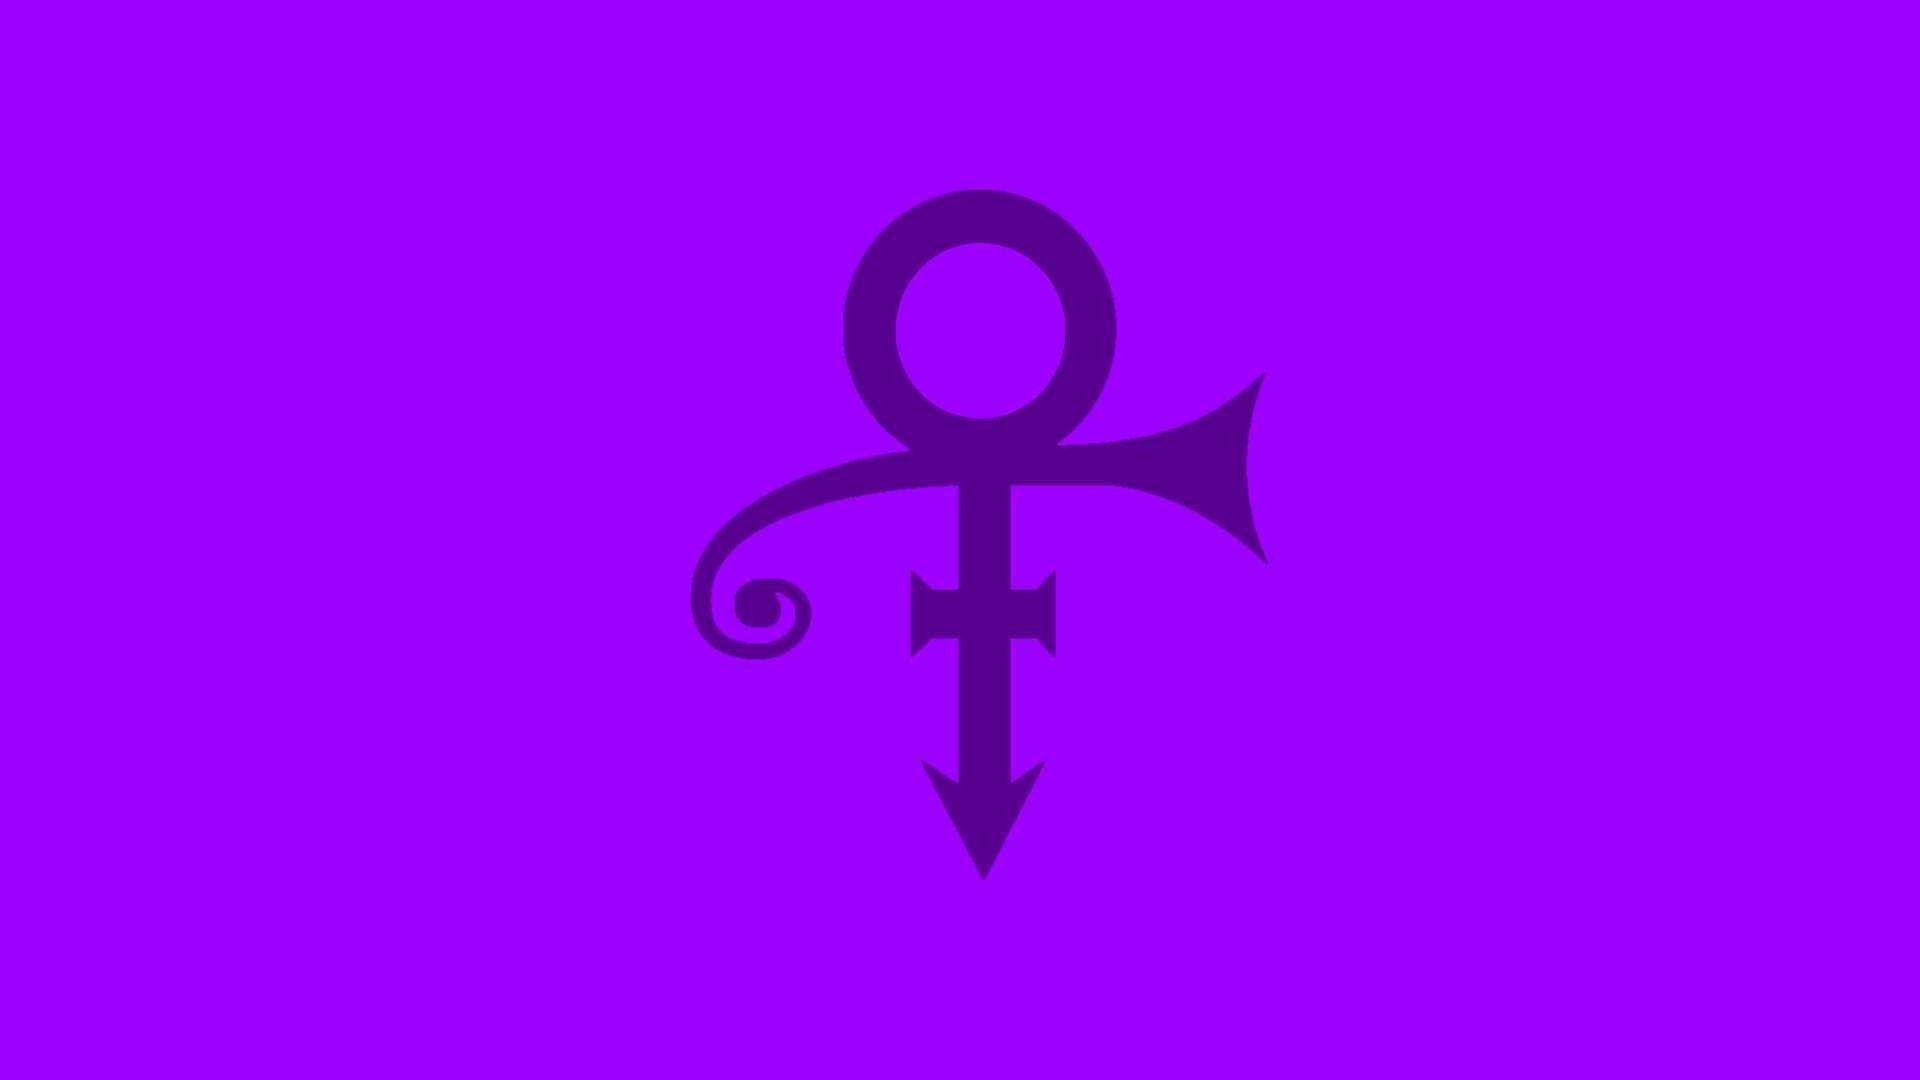 Most obviously, it merges ancient symbols for man and woman, creating a new, sexual, gender fluid one. At the time, Prince hoped